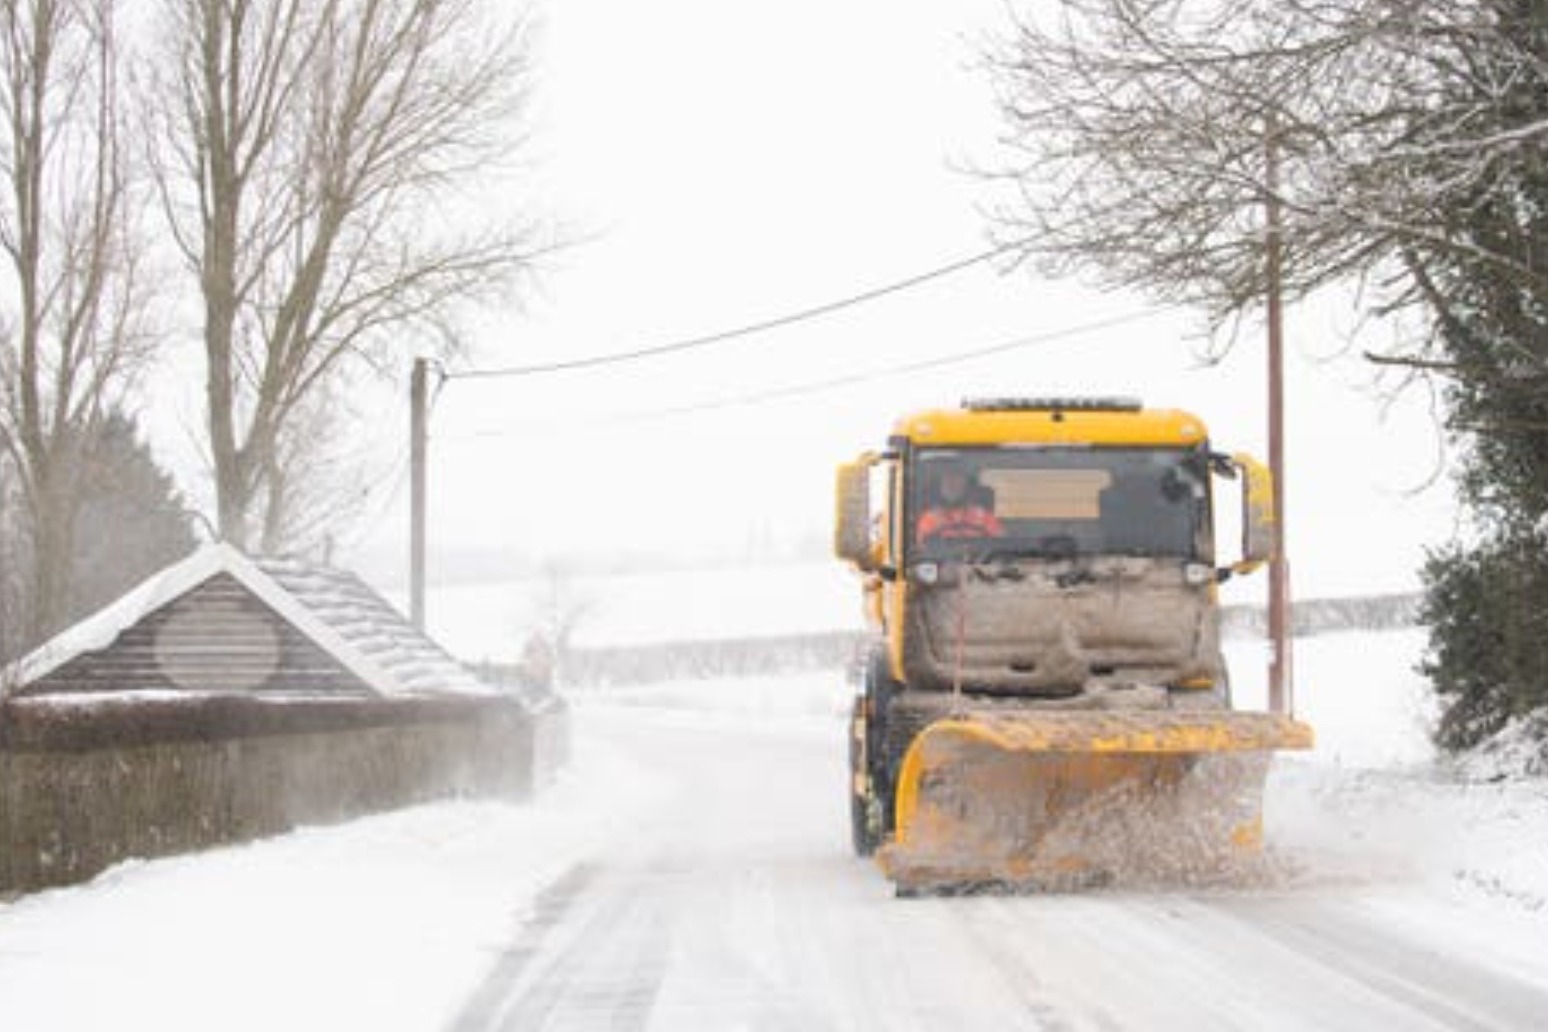 Snow and ice brings disruption to parts of UK as people warned not to travel 